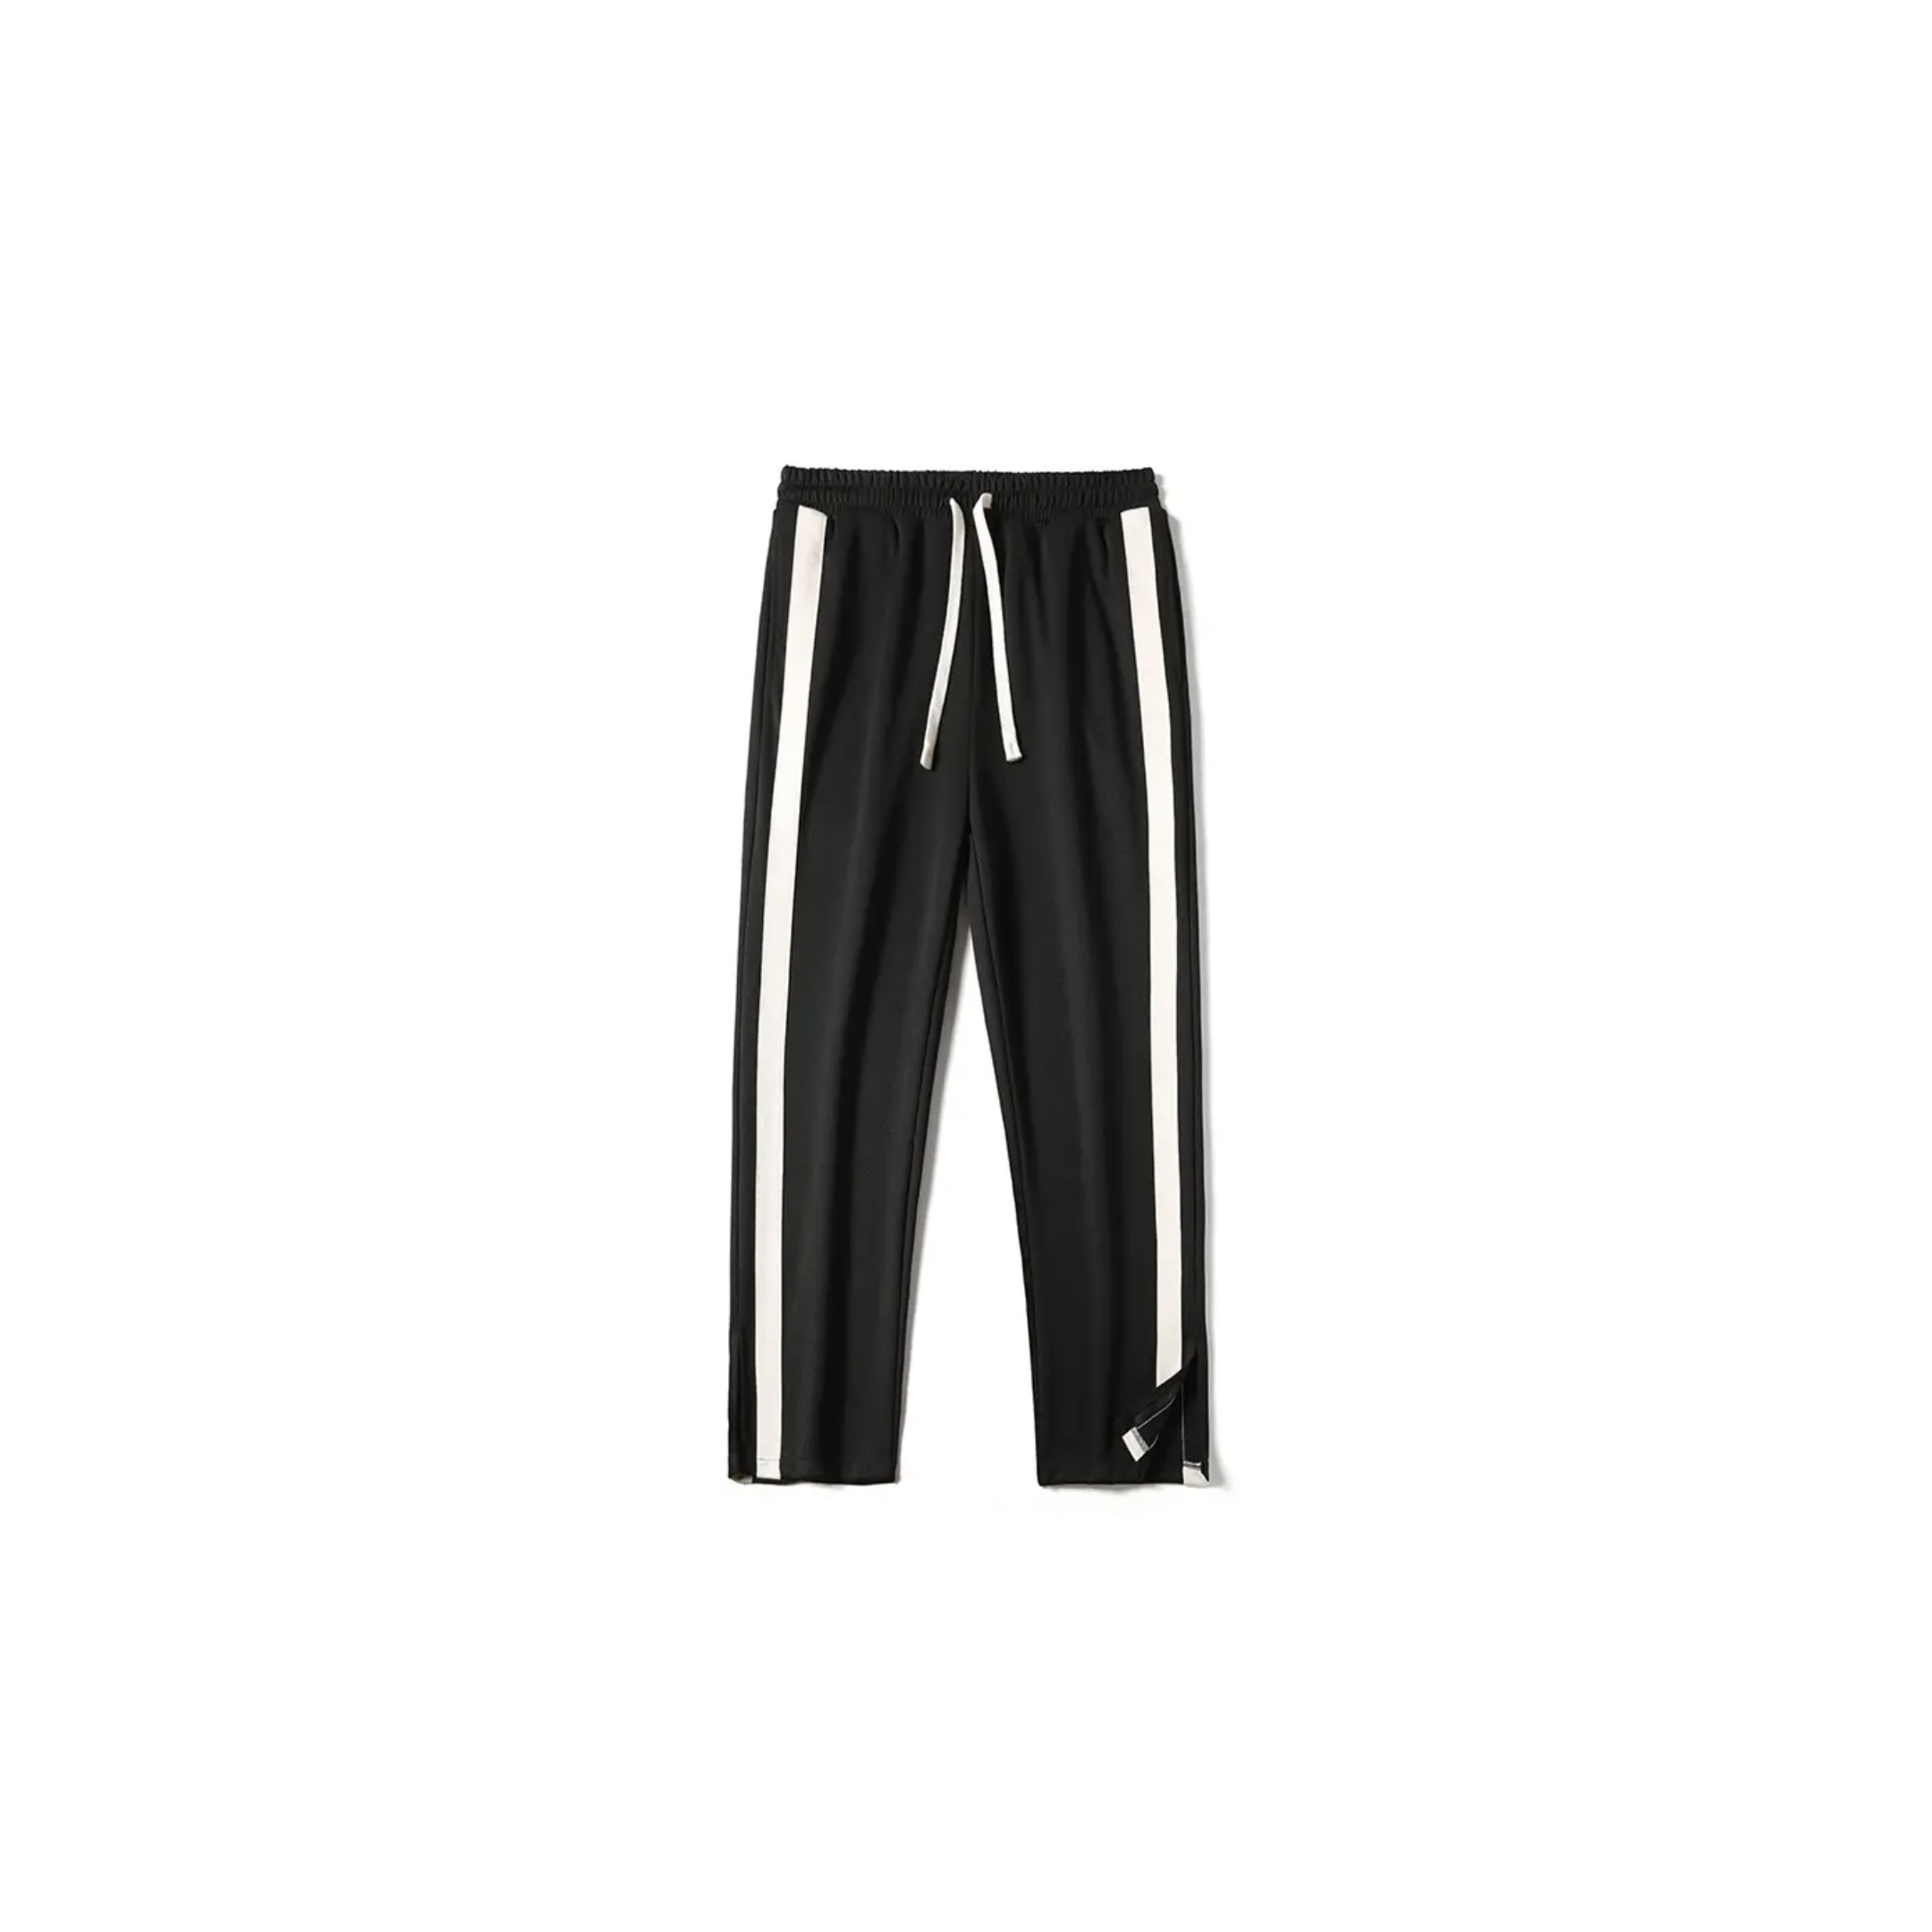 The Vintage Track Pant